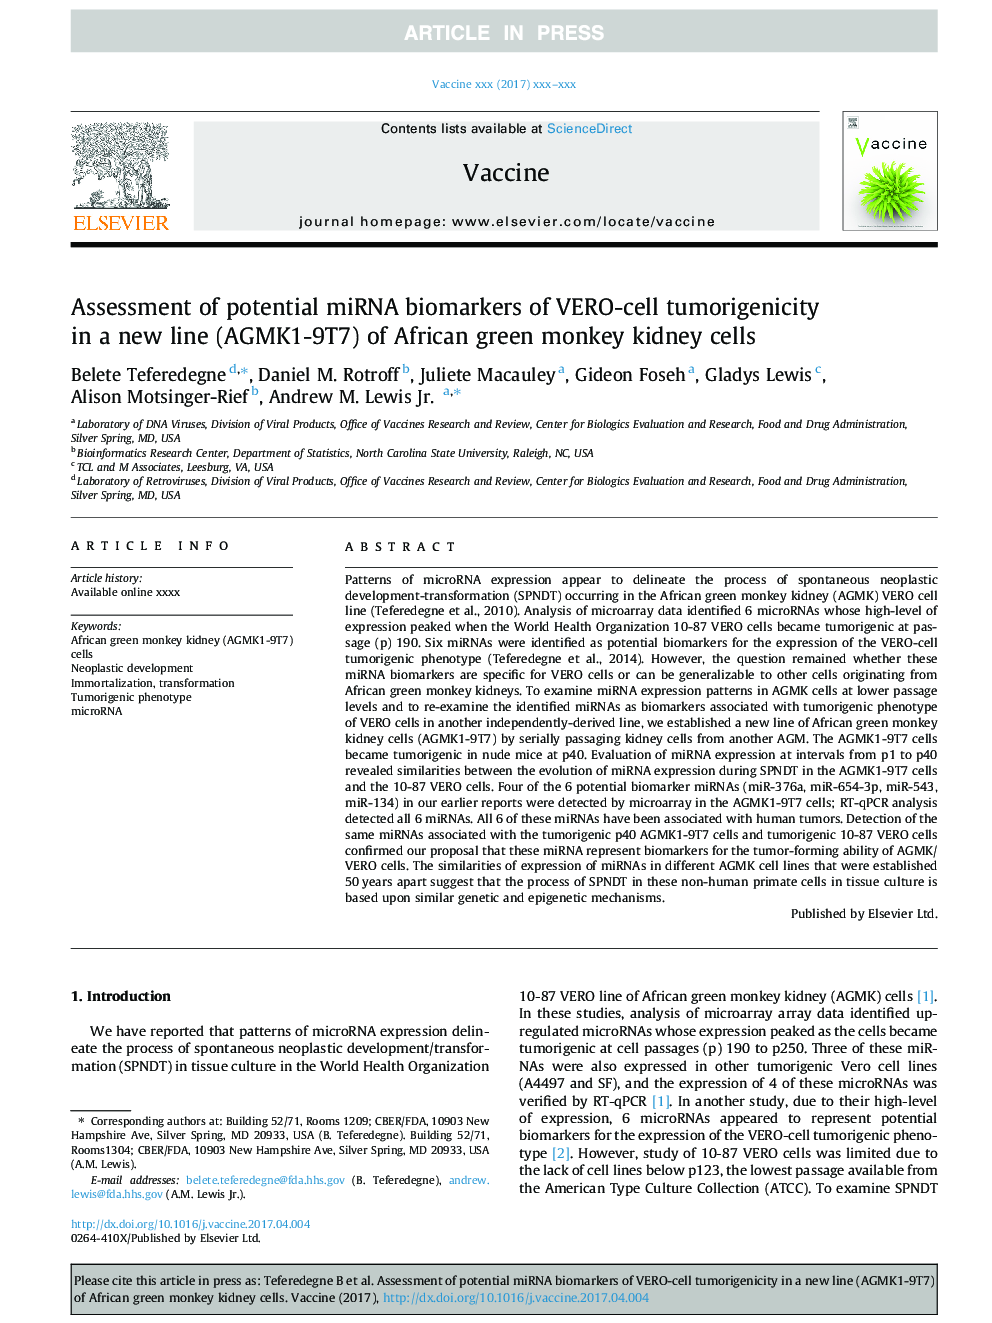 Assessment of potential miRNA biomarkers of VERO-cell tumorigenicity in a new line (AGMK1-9T7) of African green monkey kidney cells